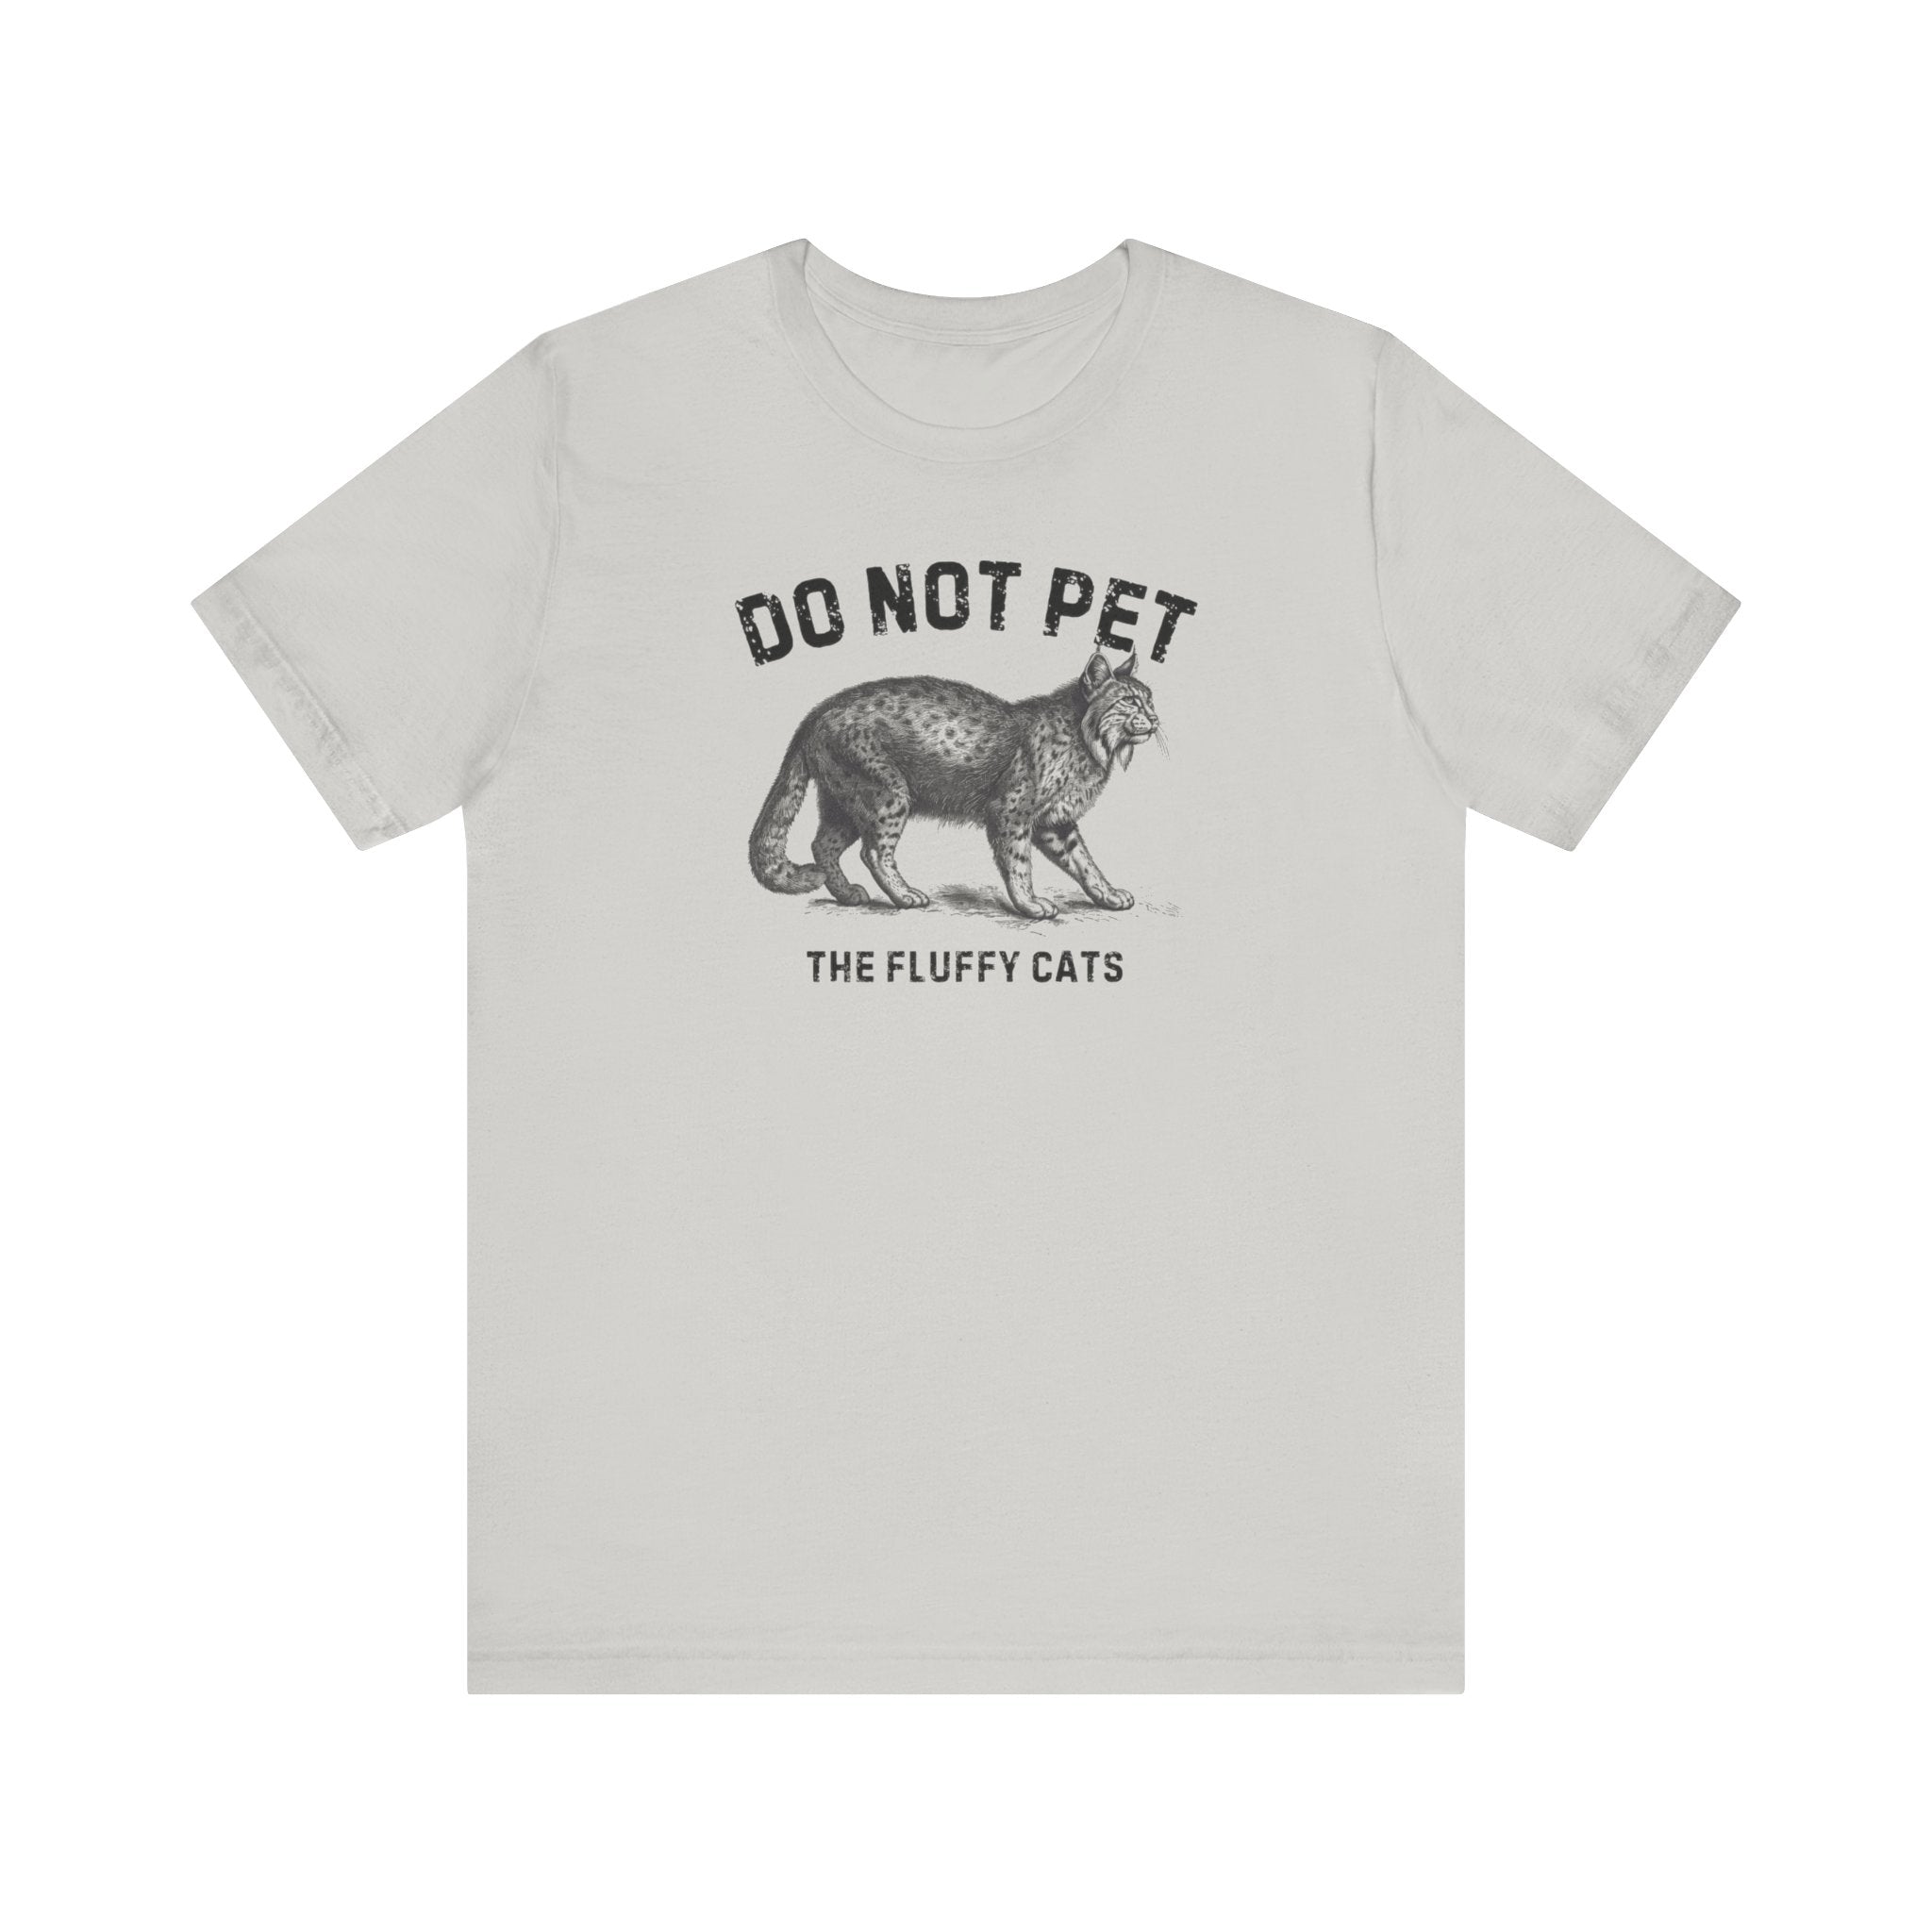 Do Not Pet The Fluffy Cats Shirt Funny Animal Lover Tee